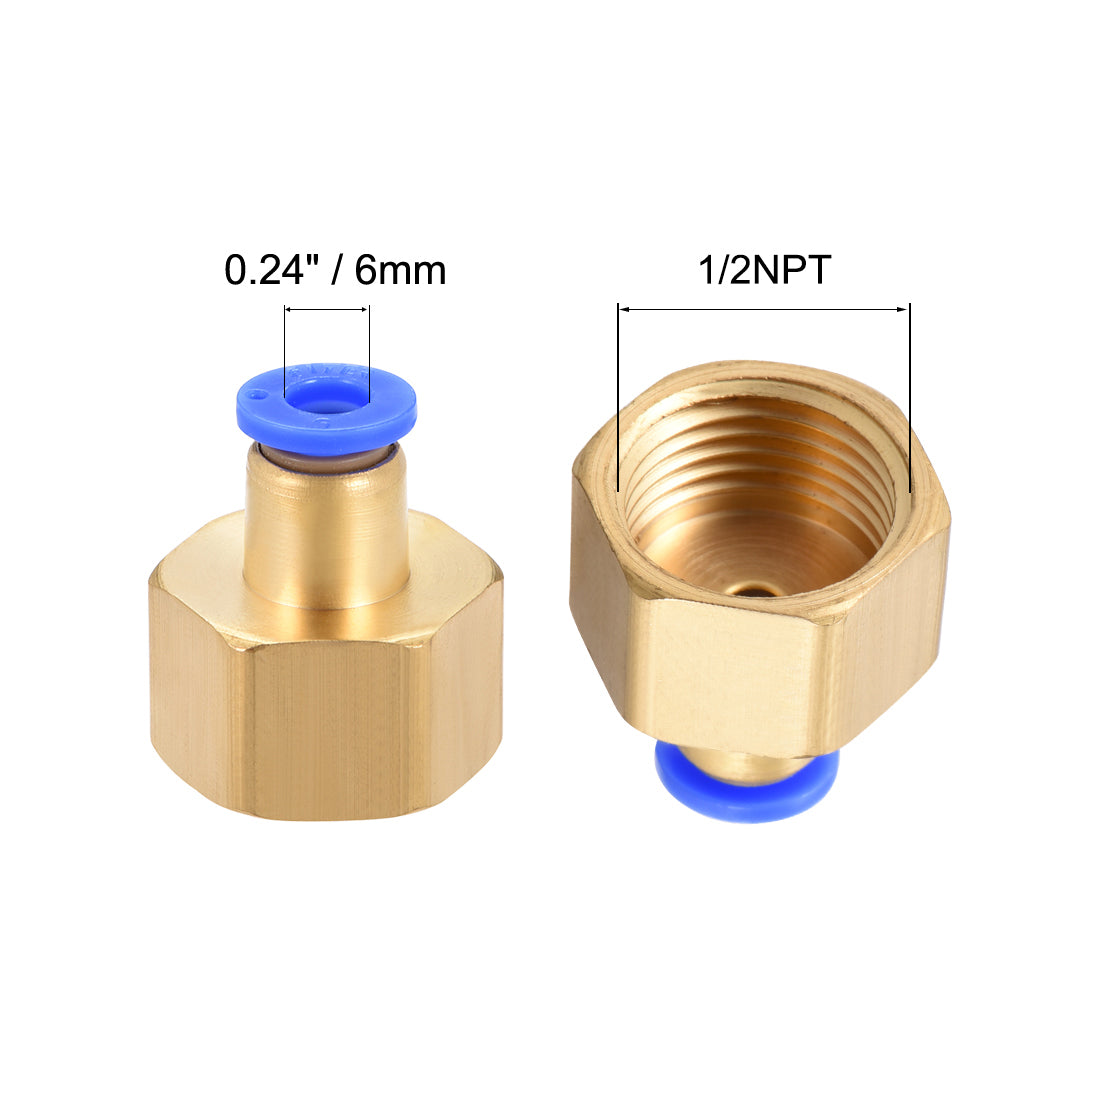 uxcell Uxcell Push to Connect Tube Fitting Adapter 6mm OD x 1/2NPT Female 4pcs